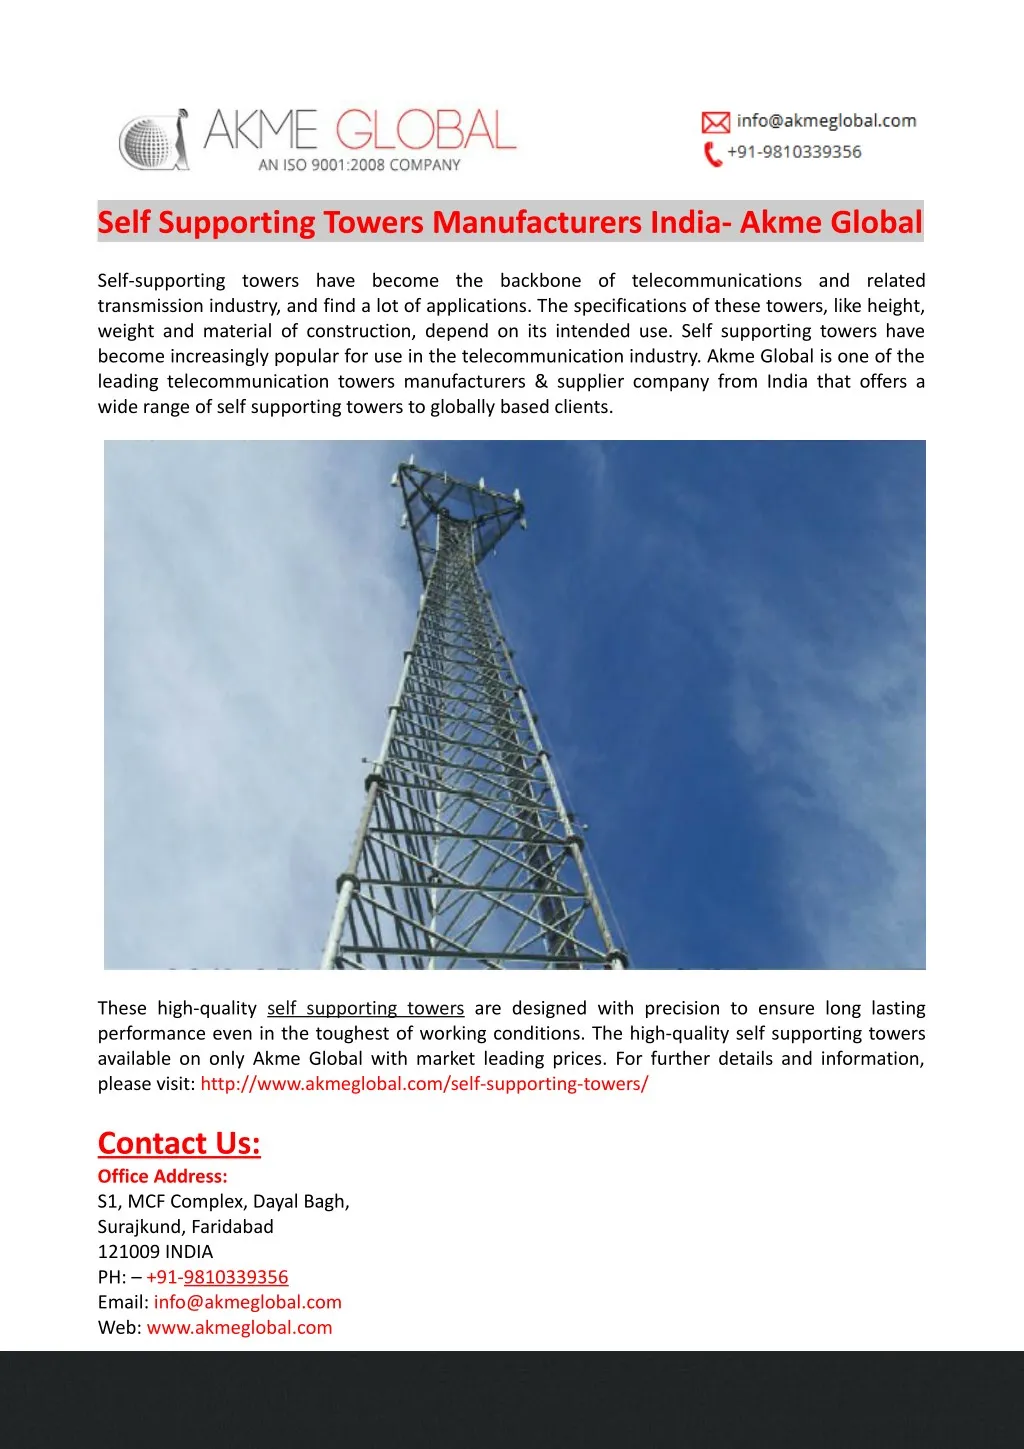 self supporting towers manufacturers india akme